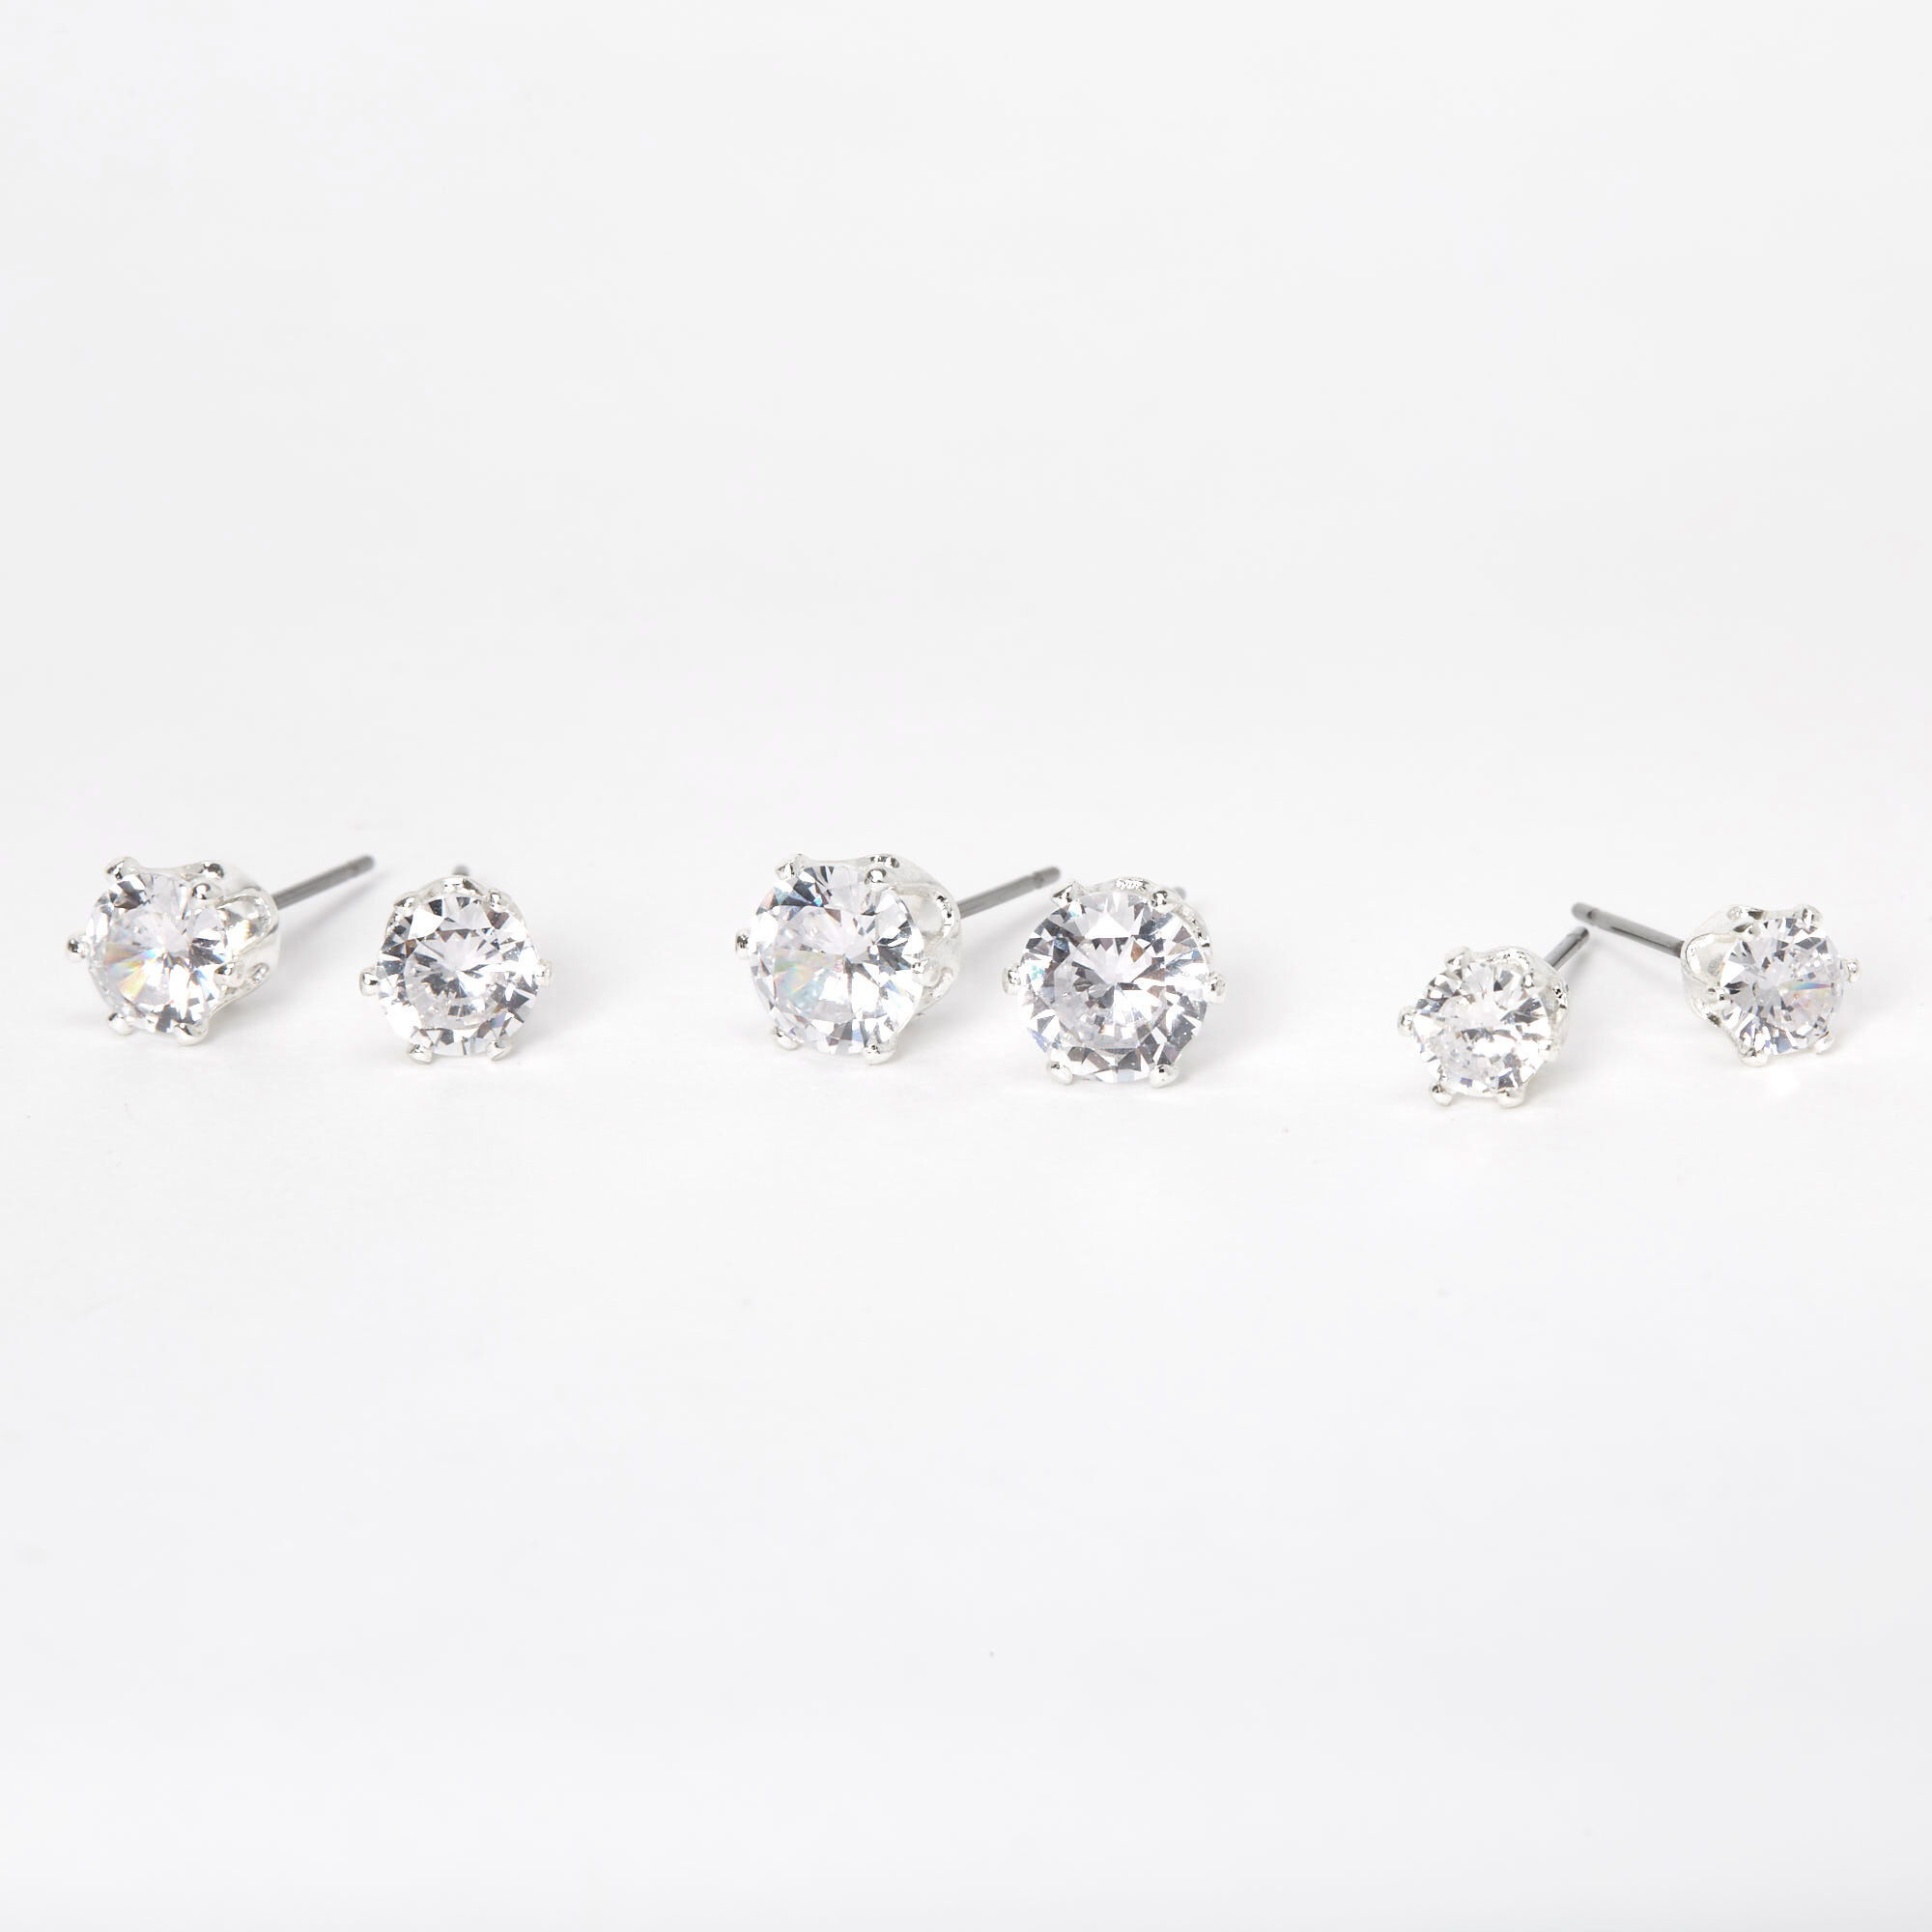 Sterling Silver Star Cubic Zirconia Stud Earrings in Silver and 5mm 6mm 7mm 8mm